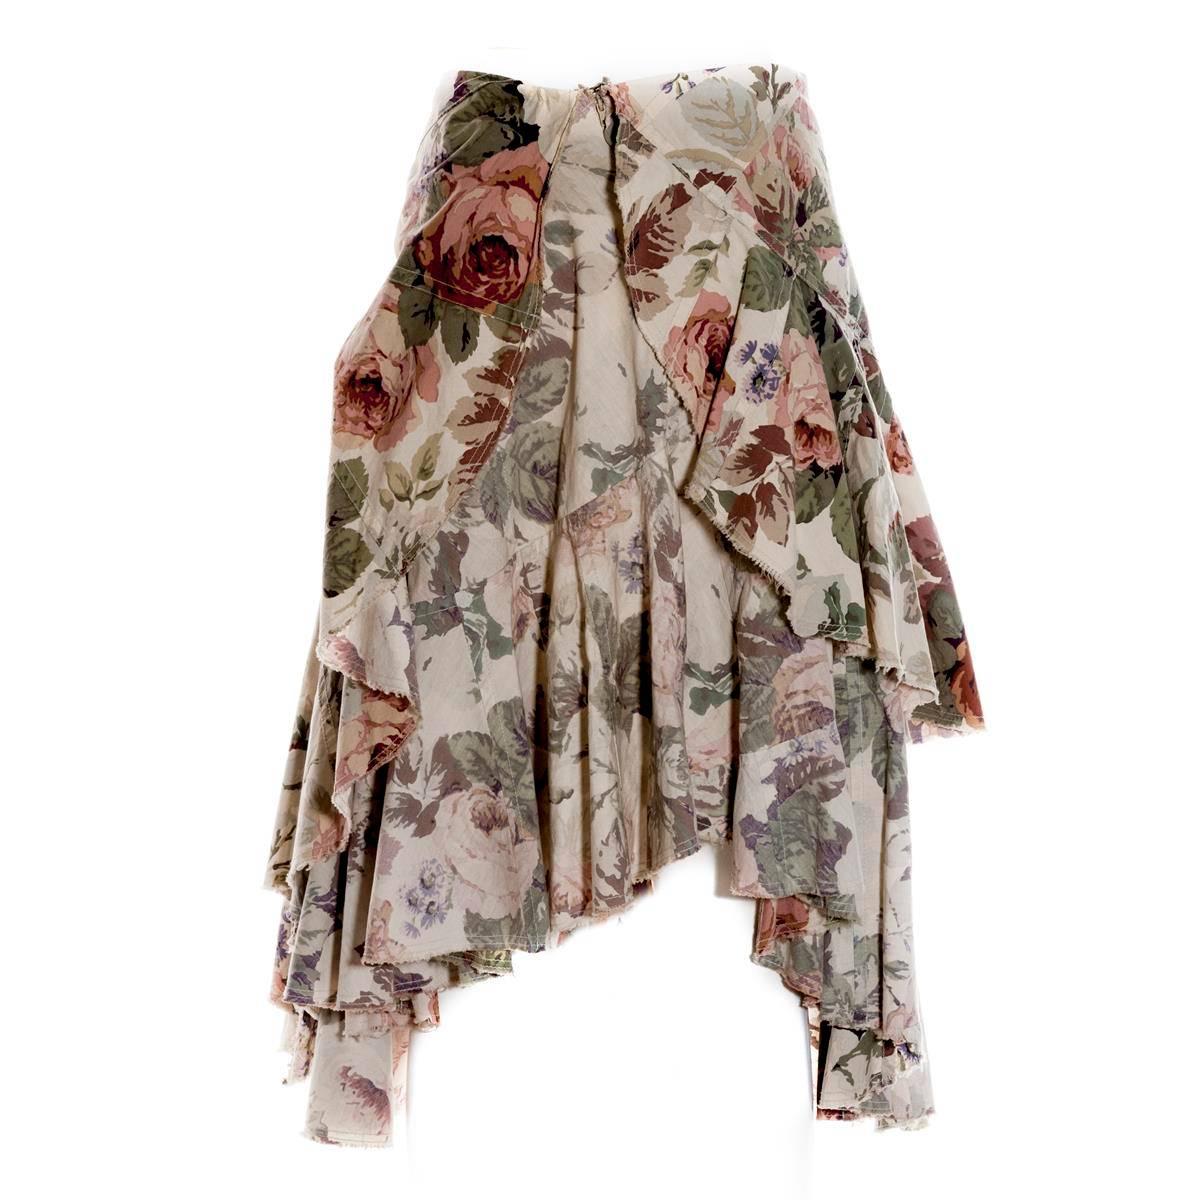 Beautiful and iconic skirt
Junya Watanabe Comme des Garçons
Cotton
Floral theme
Multicolored
Maximum length cm 75 (29.5 inches)
Made in Japan
Worldwide express shipping included in the price !